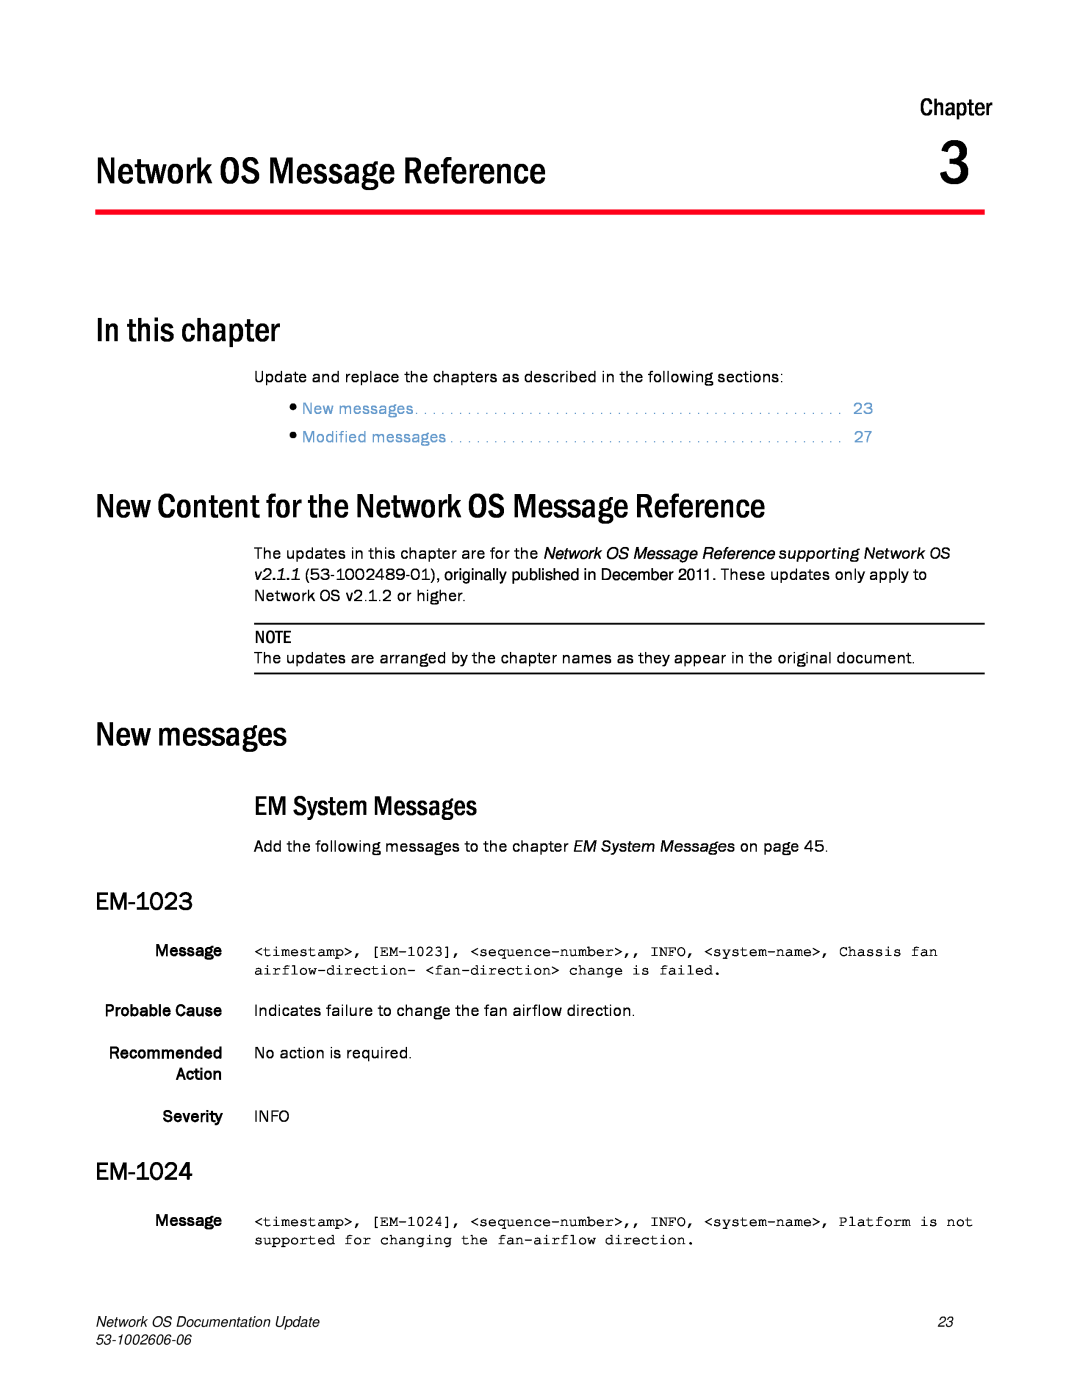 Brocade Communications Systems 2.1 New Content for the Network OS Message Reference, New messages, EM System Messages 